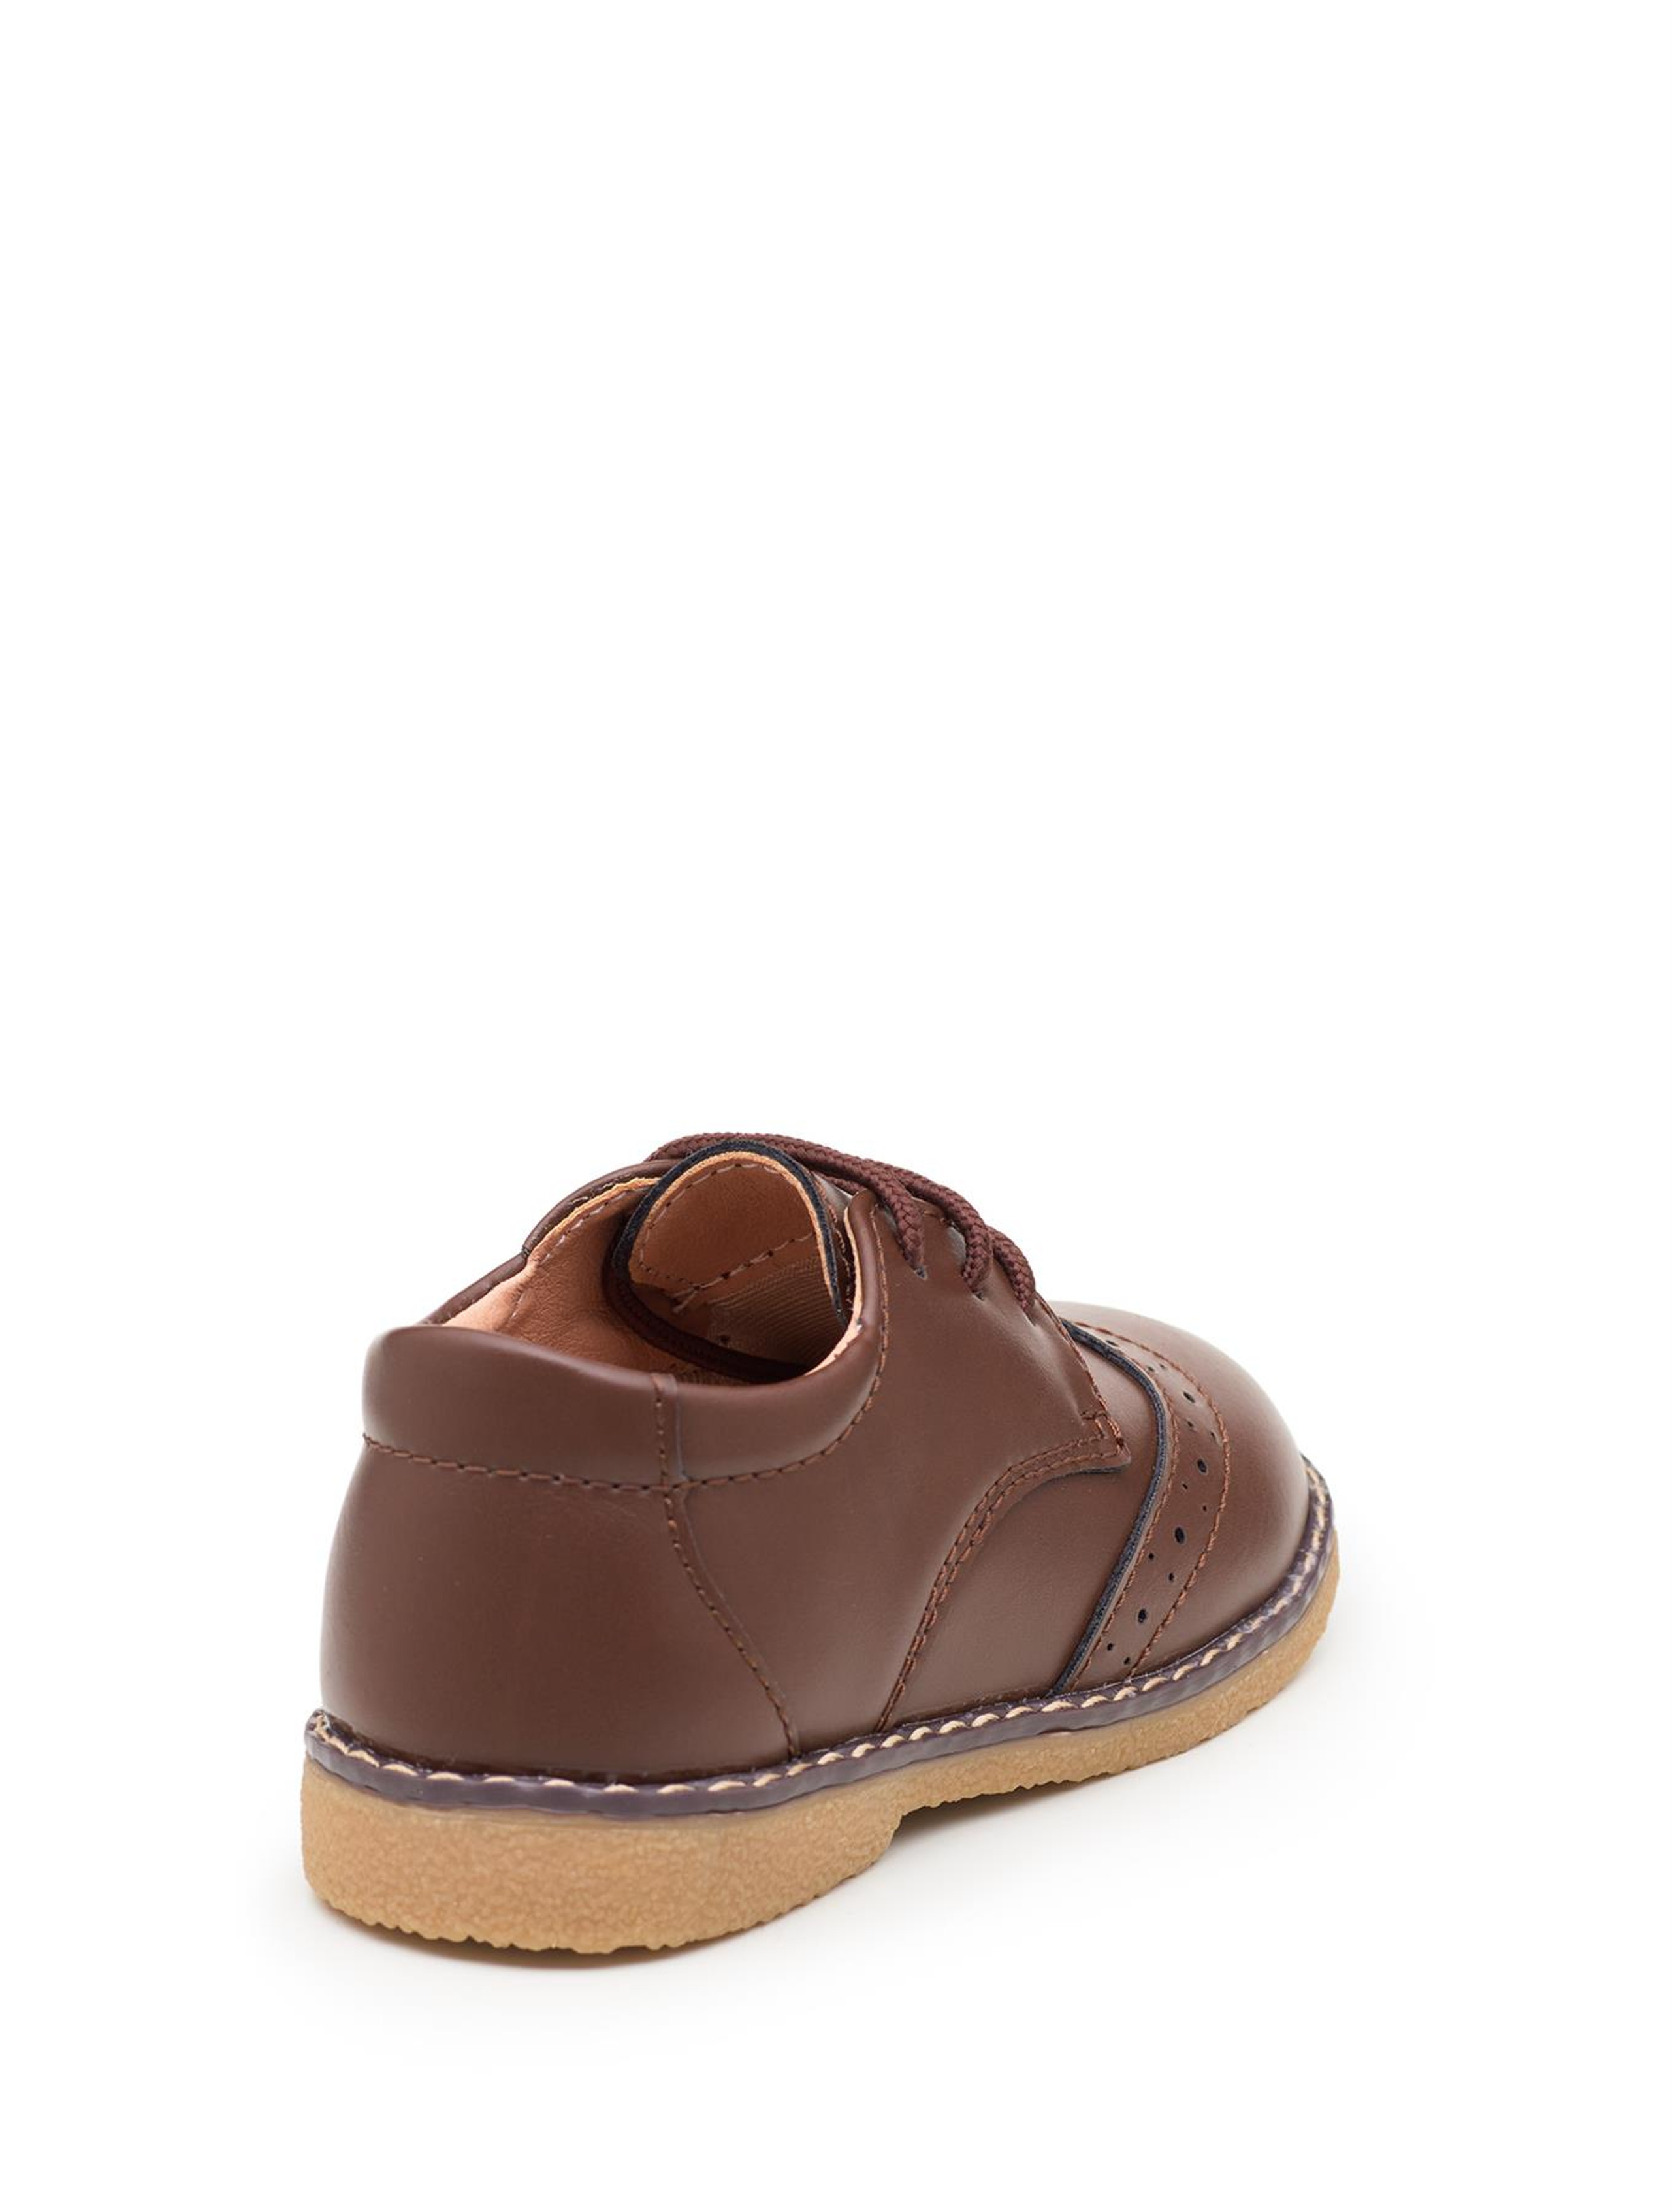 Boys infant brown brogues | Baby boys brown shoes | Roco